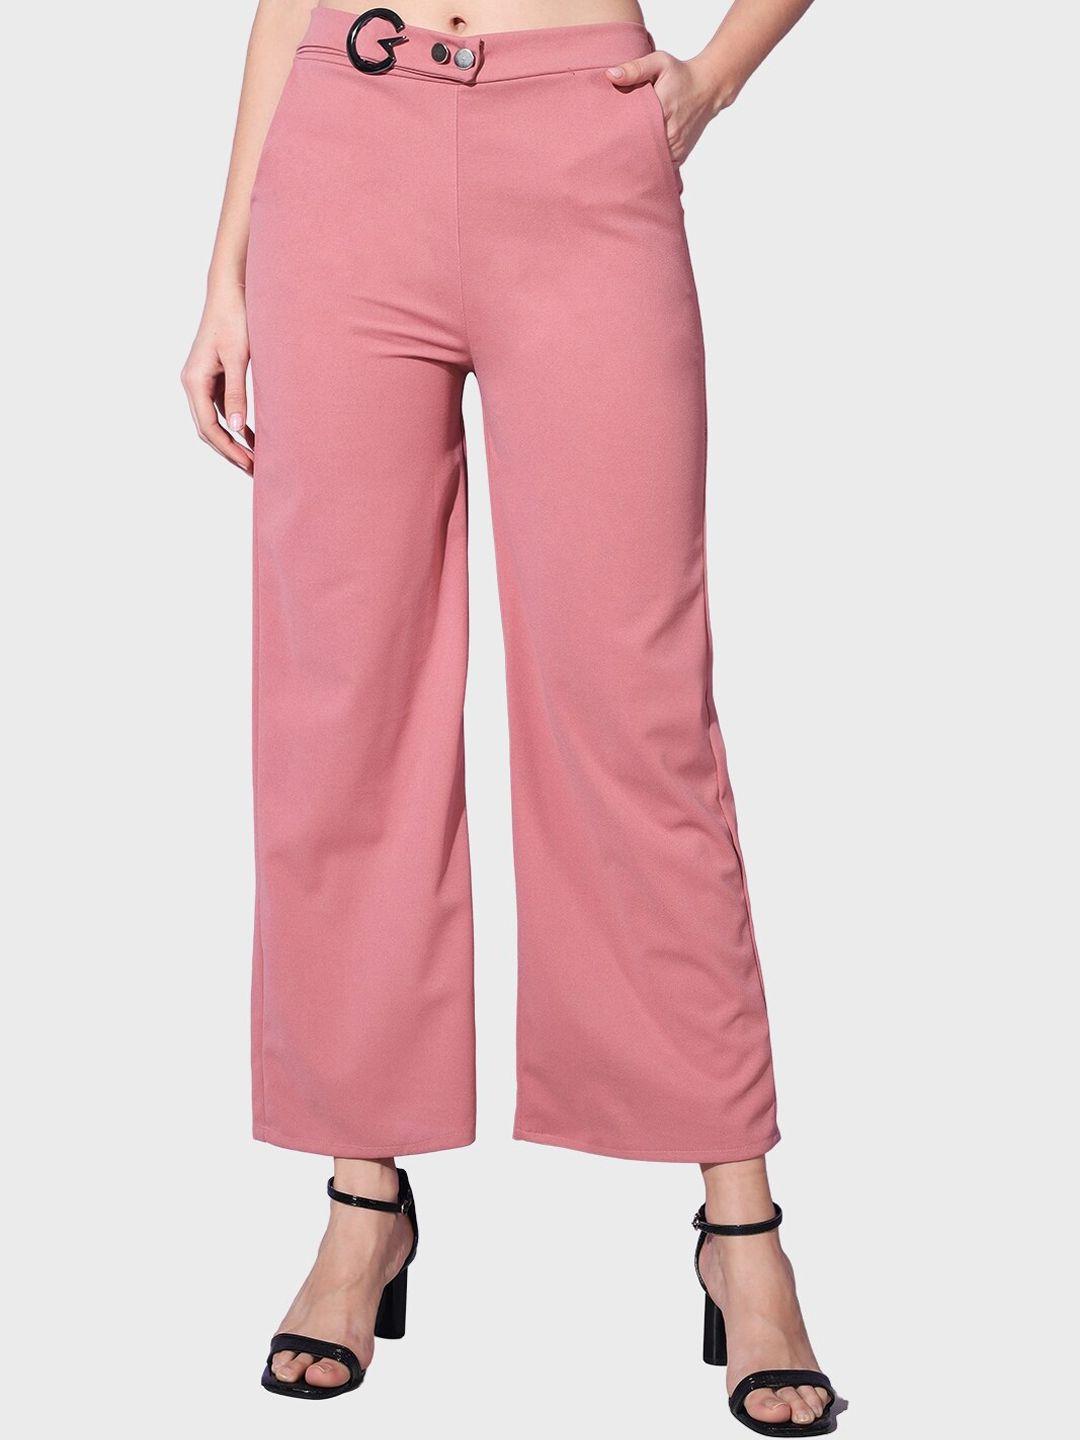 buy-new-trend-women-comfort-easy-wash-chinos-trousers